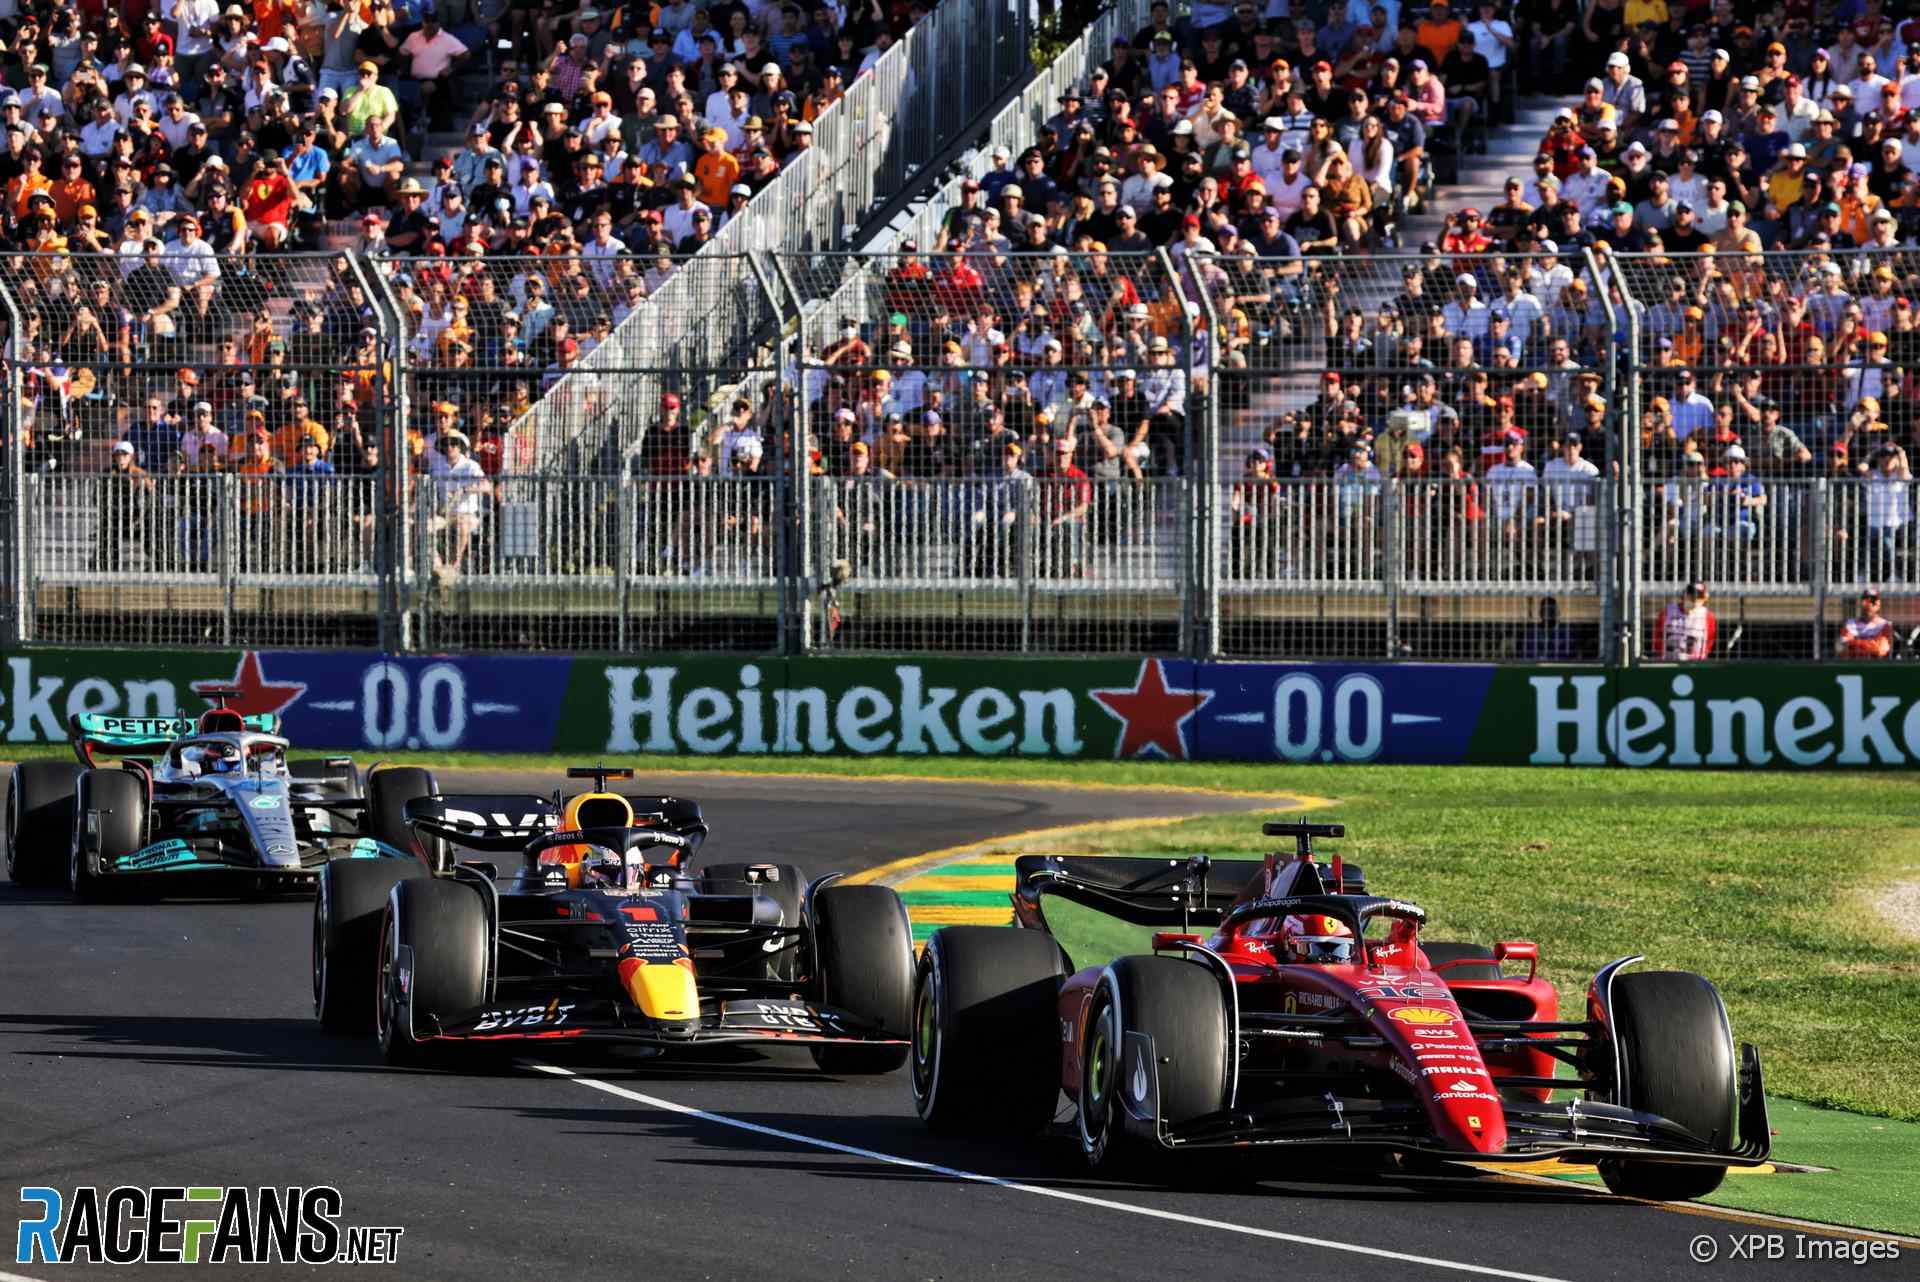 The 2022 Australian Grand Prix was held at Albert Park and won by Charles Leclerc